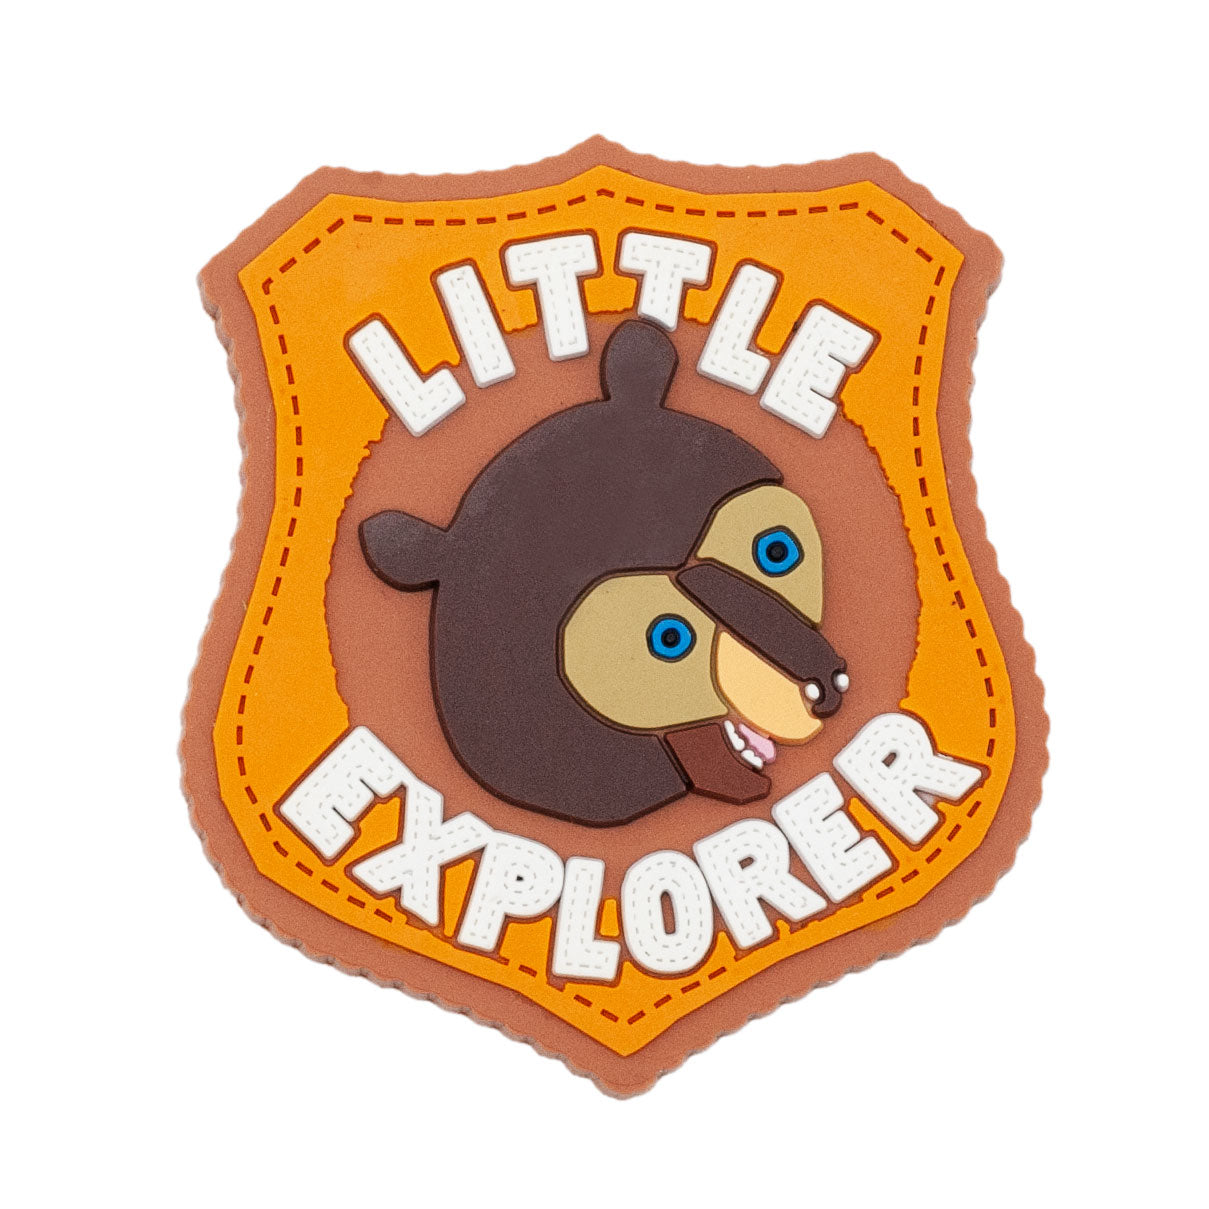 Little Explorer magnet made of soft PVC. Bown bear in the center with letter above and below bear. Colors include light brown, orange , dark brown, blue eyes, and white lettering. Lettering says "little explorer"